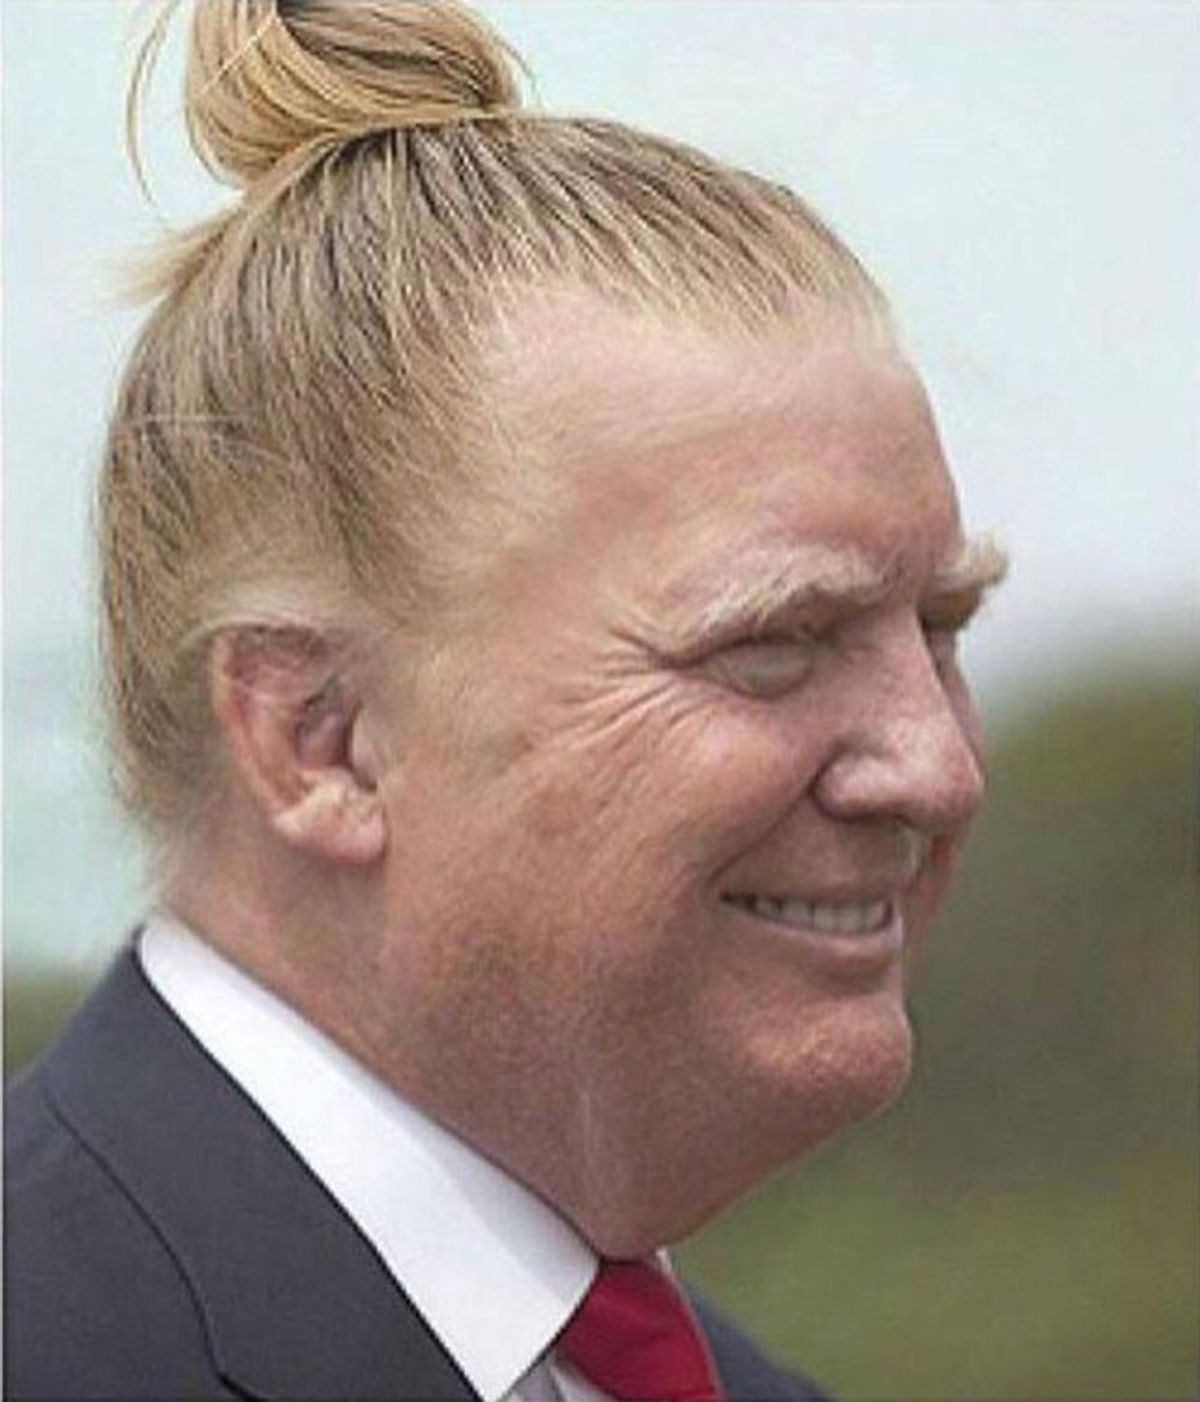 Hairstyles That Would Better Suit Trump